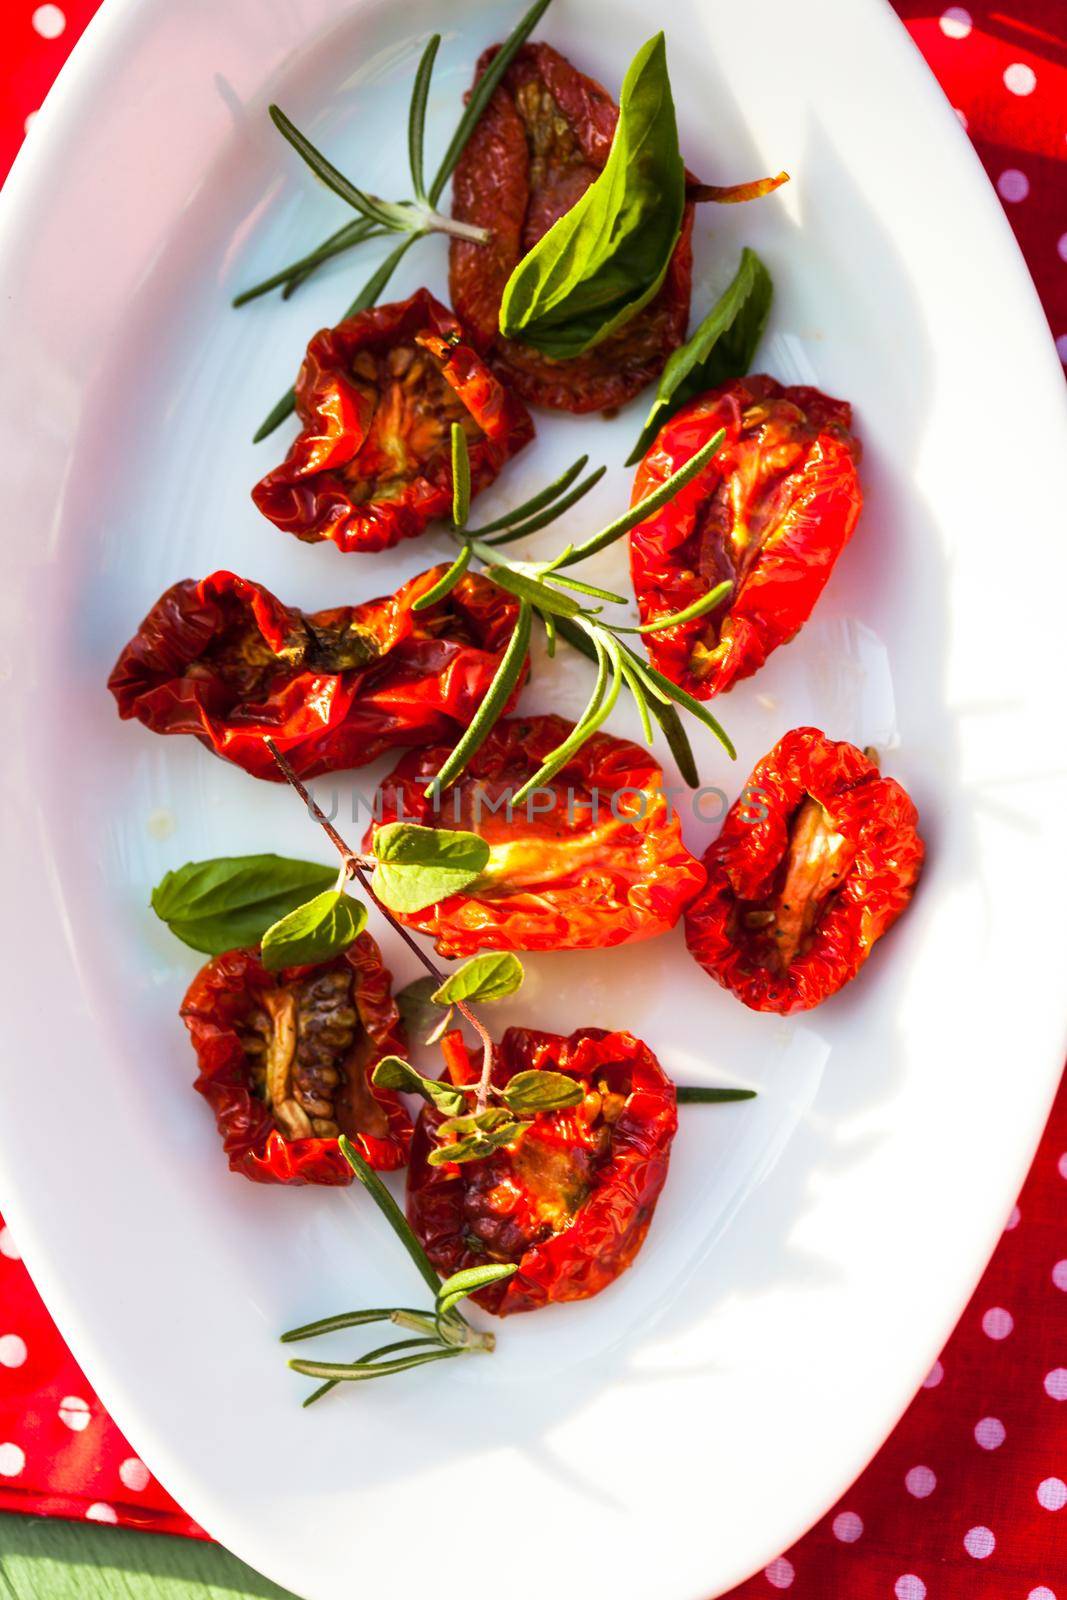 sun dried tomatoes on a white plate with fresh herbs - rosemary, basil and oregano